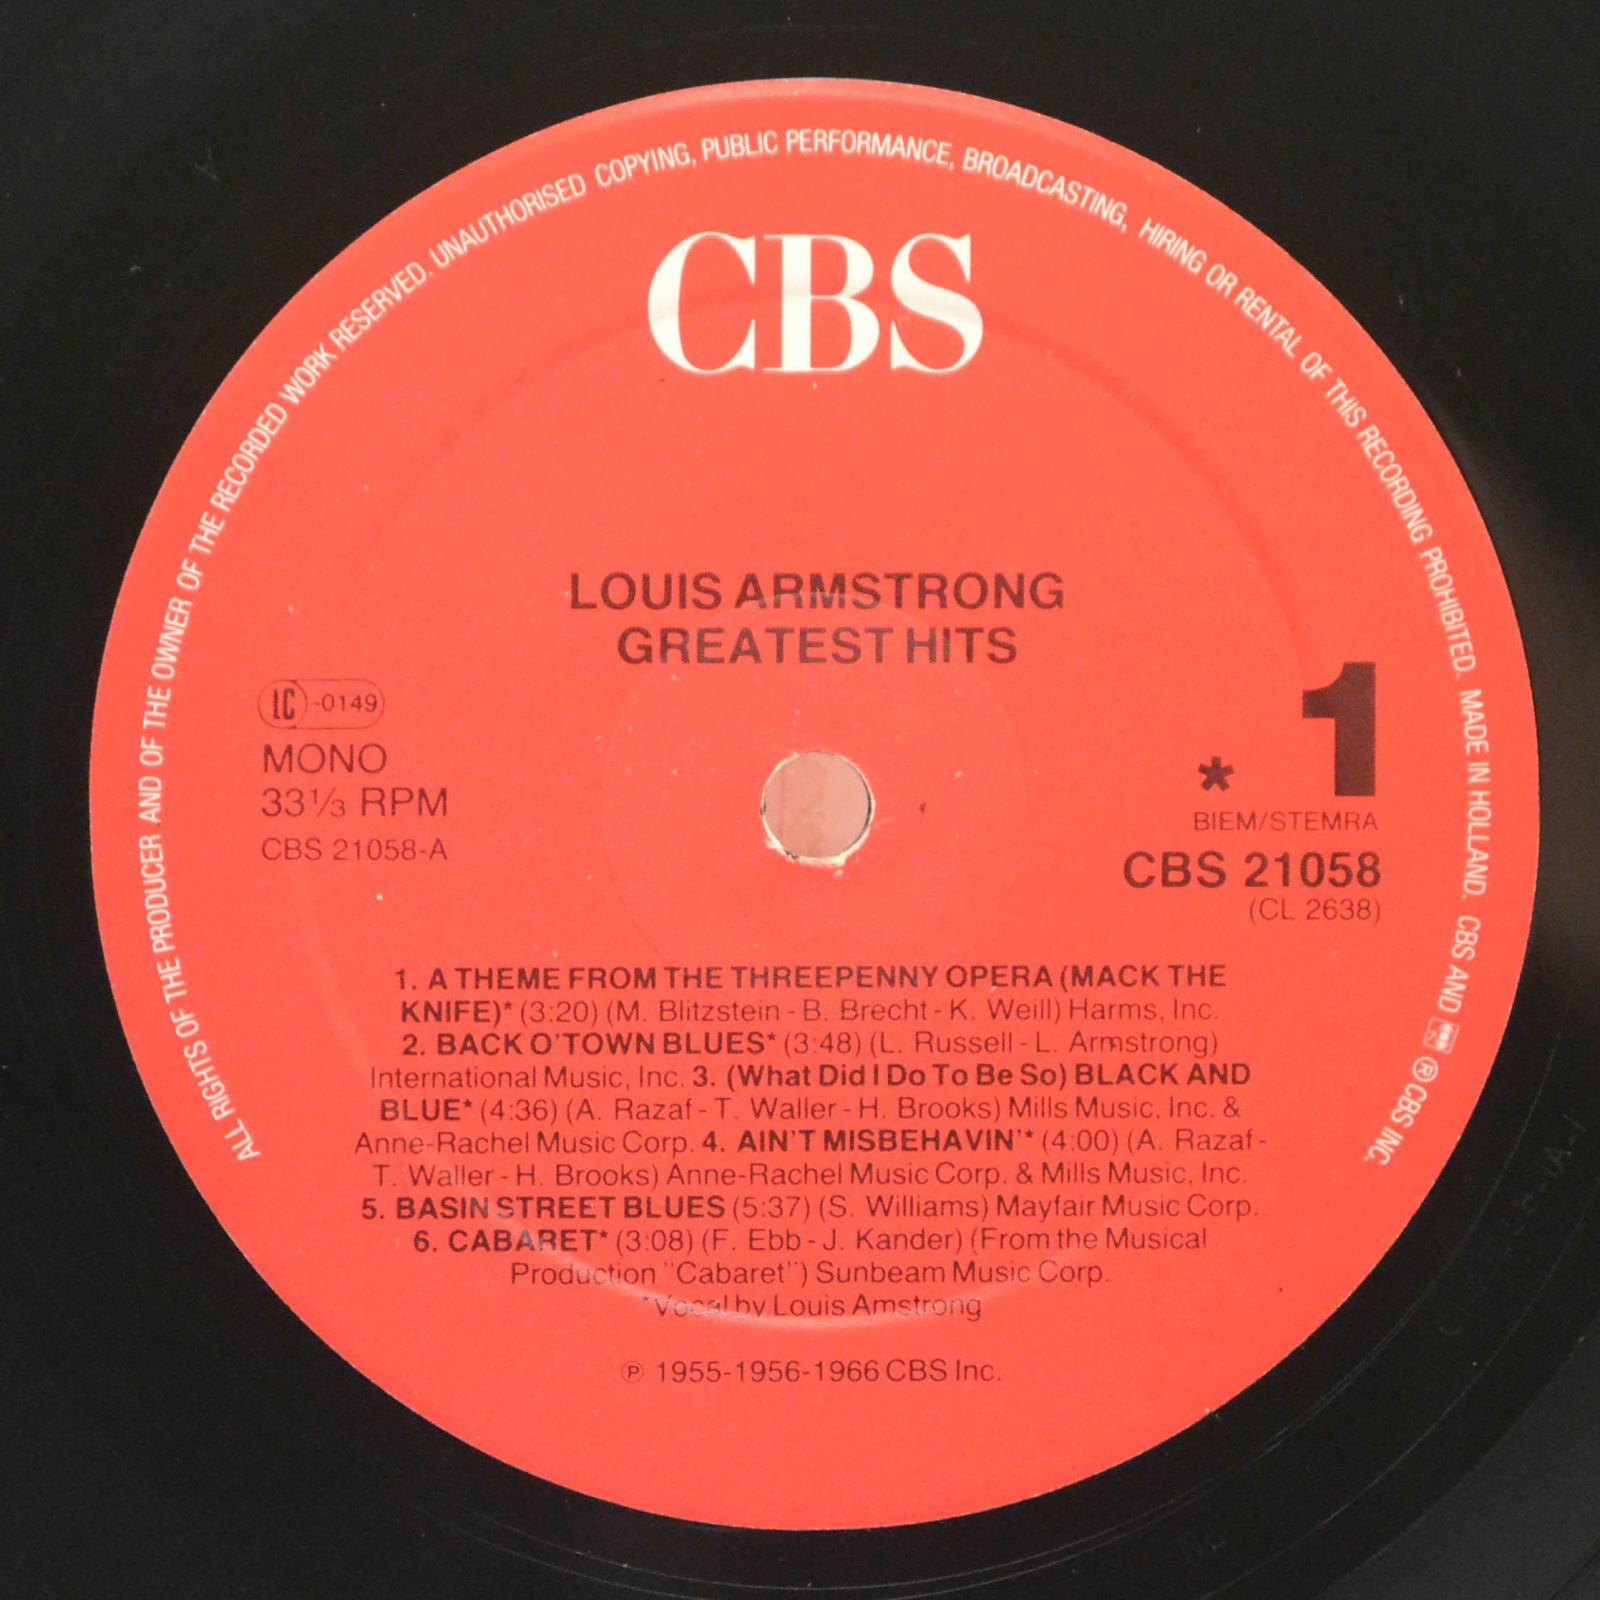 Louis Armstrong — Greatest Hits, 1983